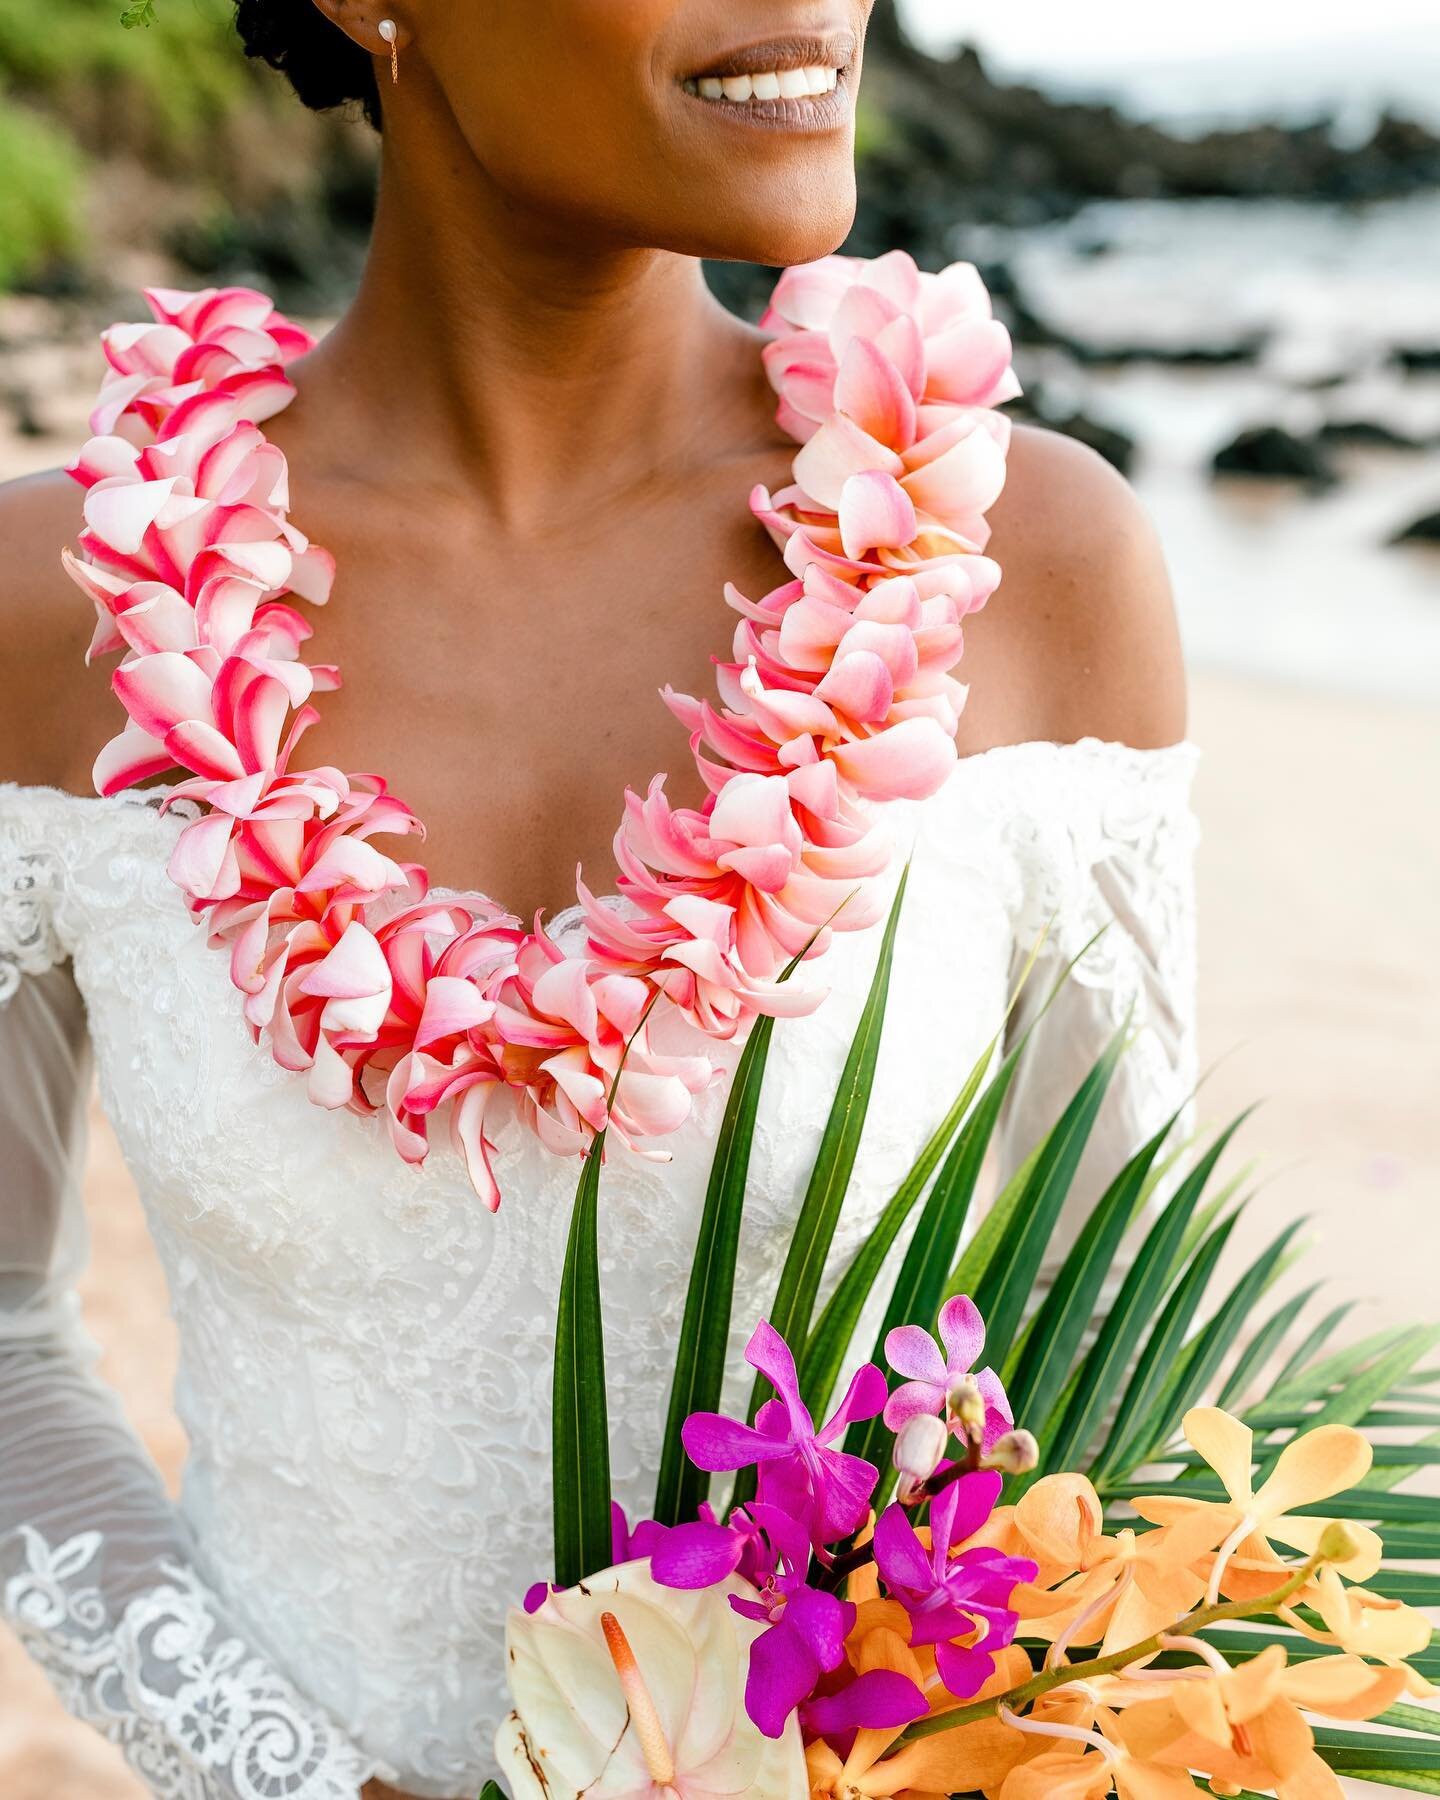 Today is orange 🧡 in @vanessahicksphotography #coloryourfeed challenge. I&rsquo;m sharing an image of a stunning bride, highlighting the beautiful orange orchids in her bouquet. I love the elegant simplicity of this bride&rsquo;s bouquet 😍

#mauibr